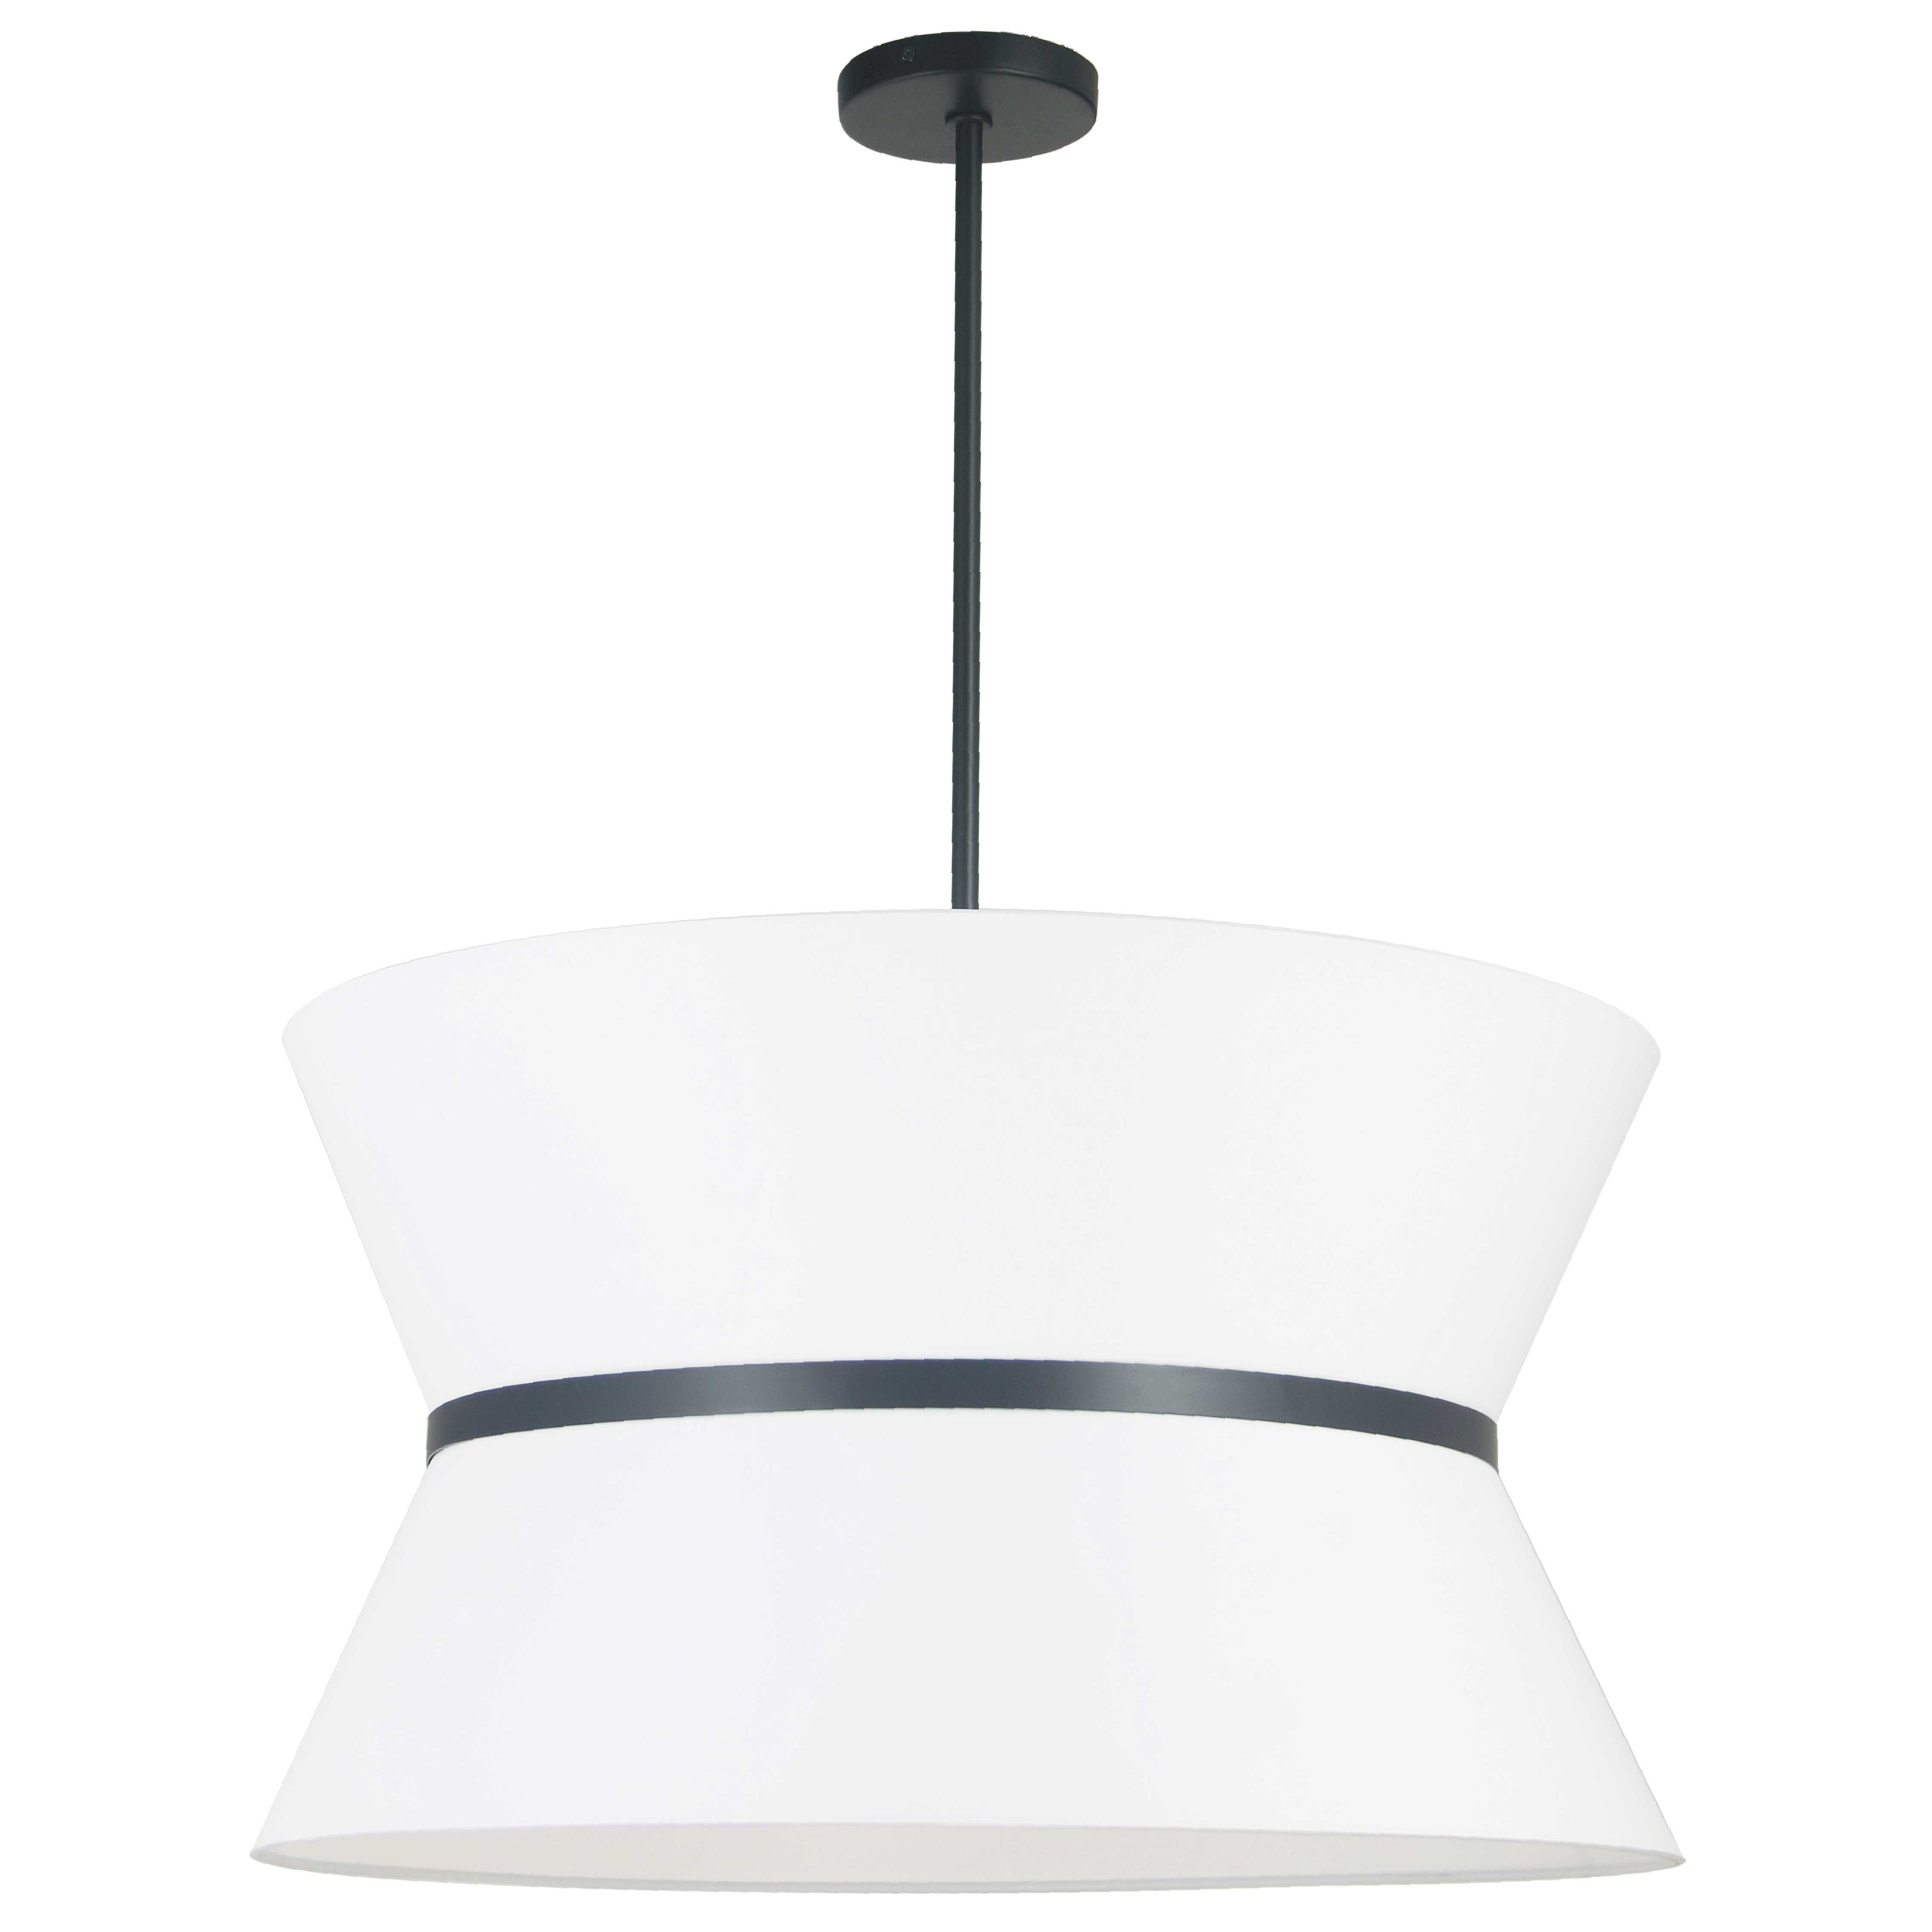 The Caterine family of lighting incorporates an elegant tiered design based on bold contrasts. With options as both pendant and chandelier lighting, Caterine will unify home décor with a luxurious touch.  A drop base in metal with a choice of finishes ends with a cinched fabric shade, adding fluid lines to sleek minimalism or modernist décors. The shade is banded, and comes in a choice of chic base/shade/band combinations. The transitional design will blend with mid-century to ultra modern furnishings, making a statement with a small footprint adaptable to any area.